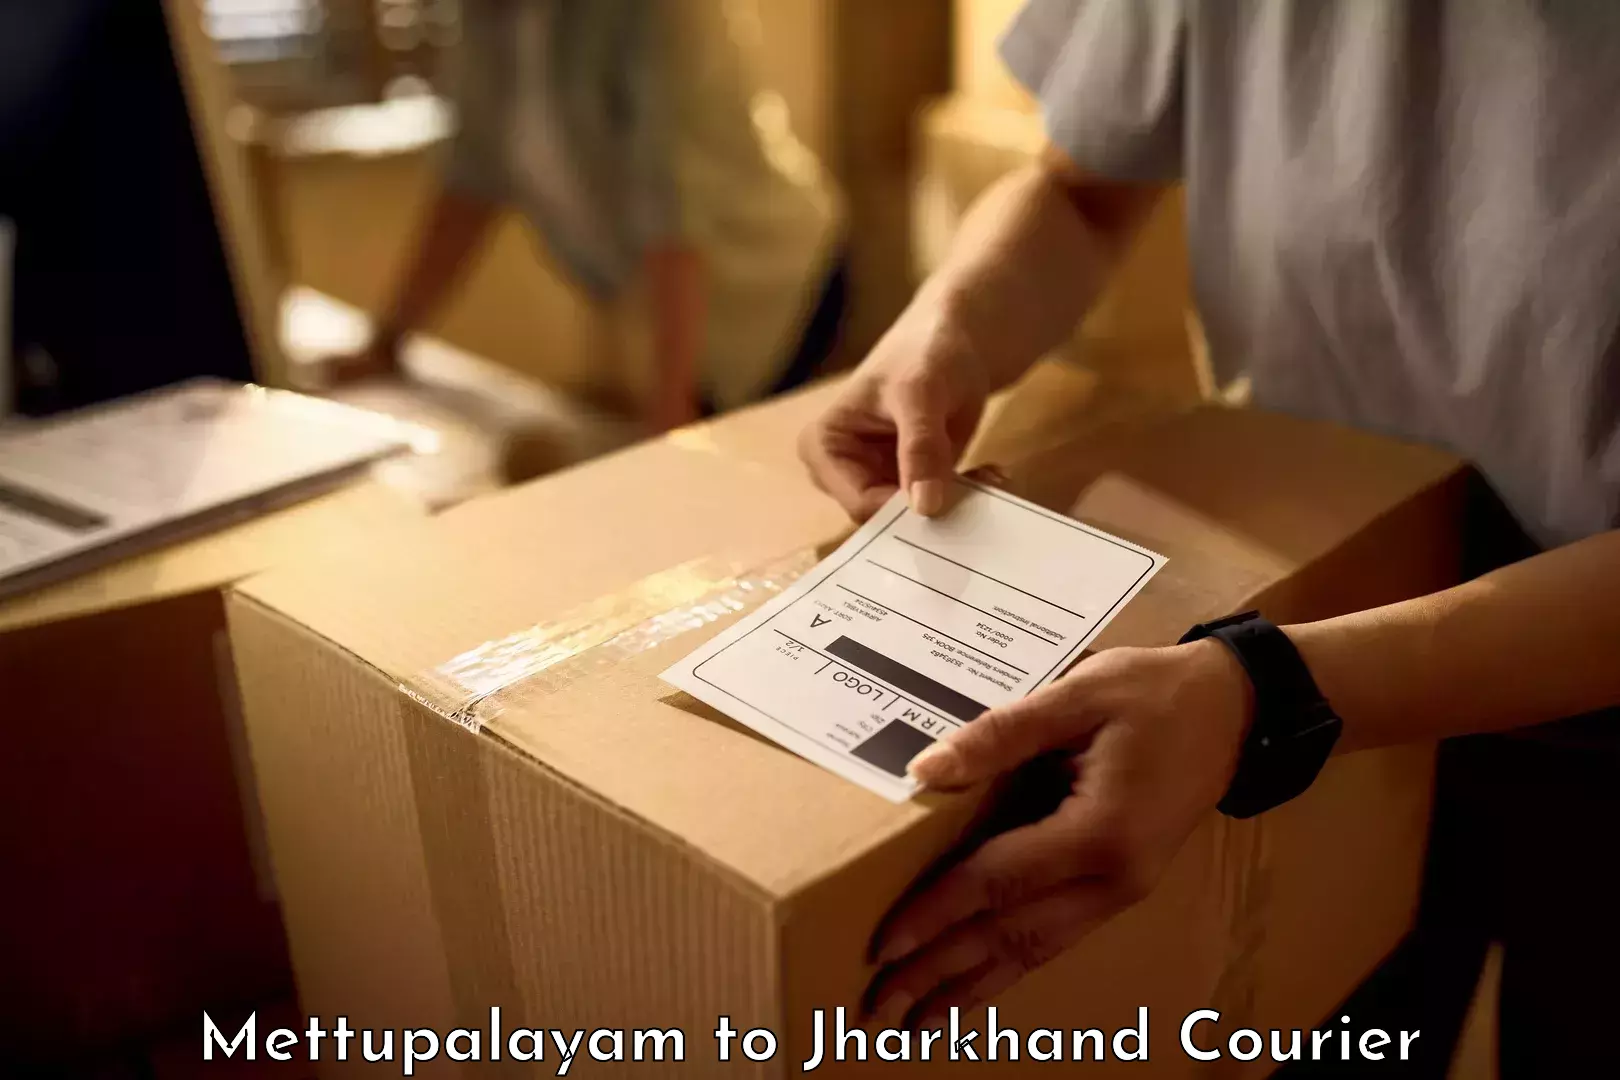 Instant baggage transport quote Mettupalayam to Jamshedpur